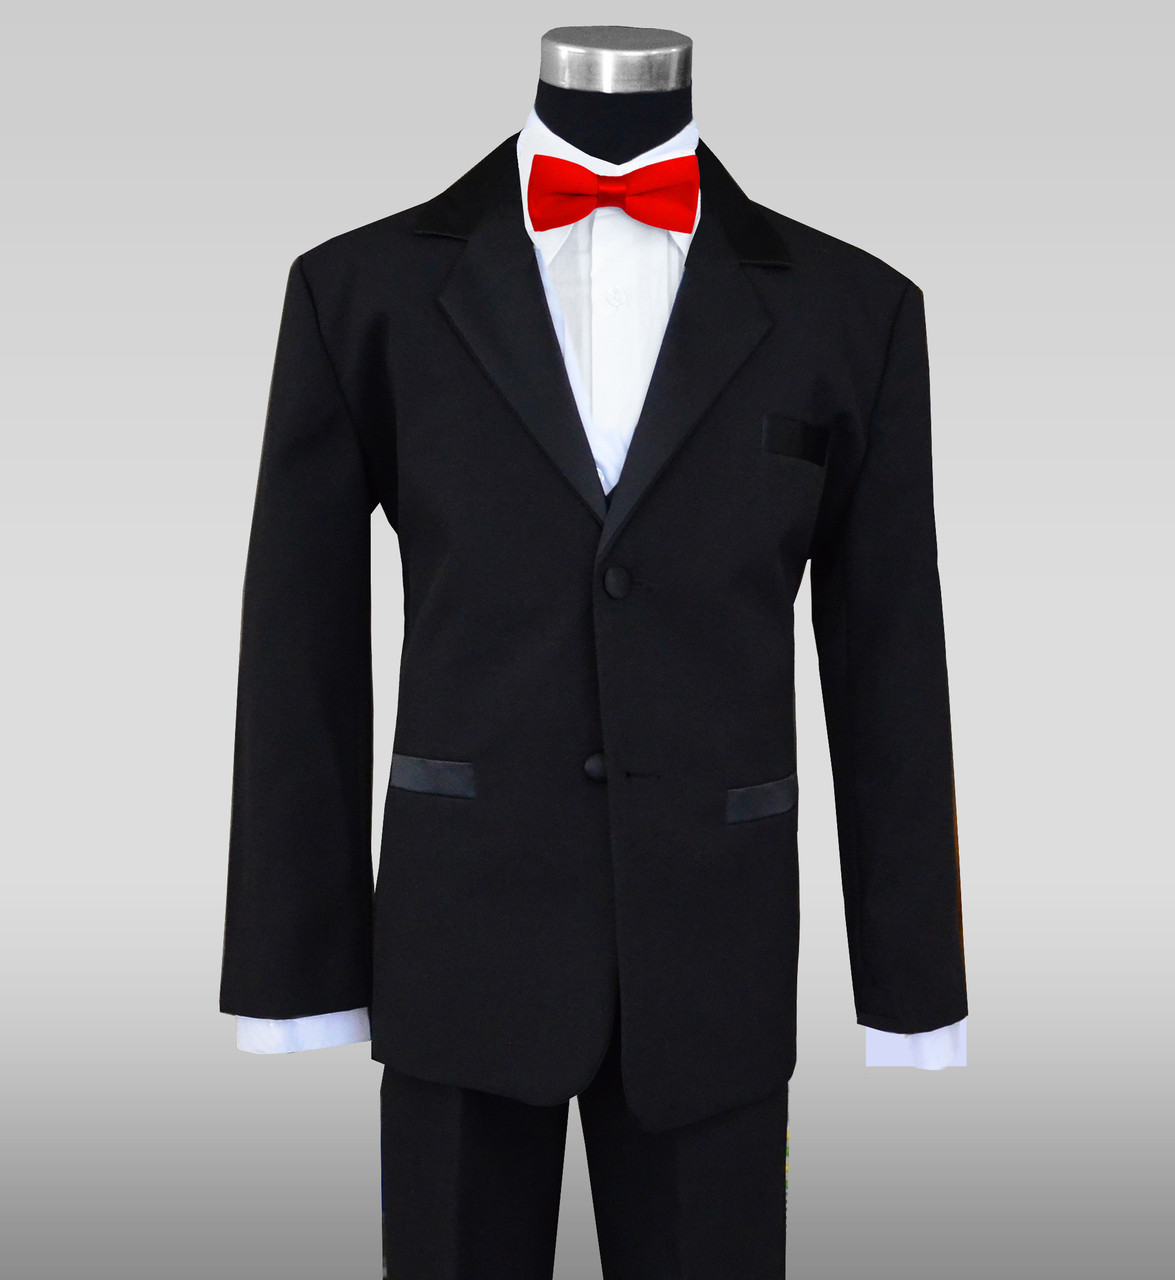 Boys Tuxedos In Black With Red Slim Bow Tie - red tuxedo pants roblox